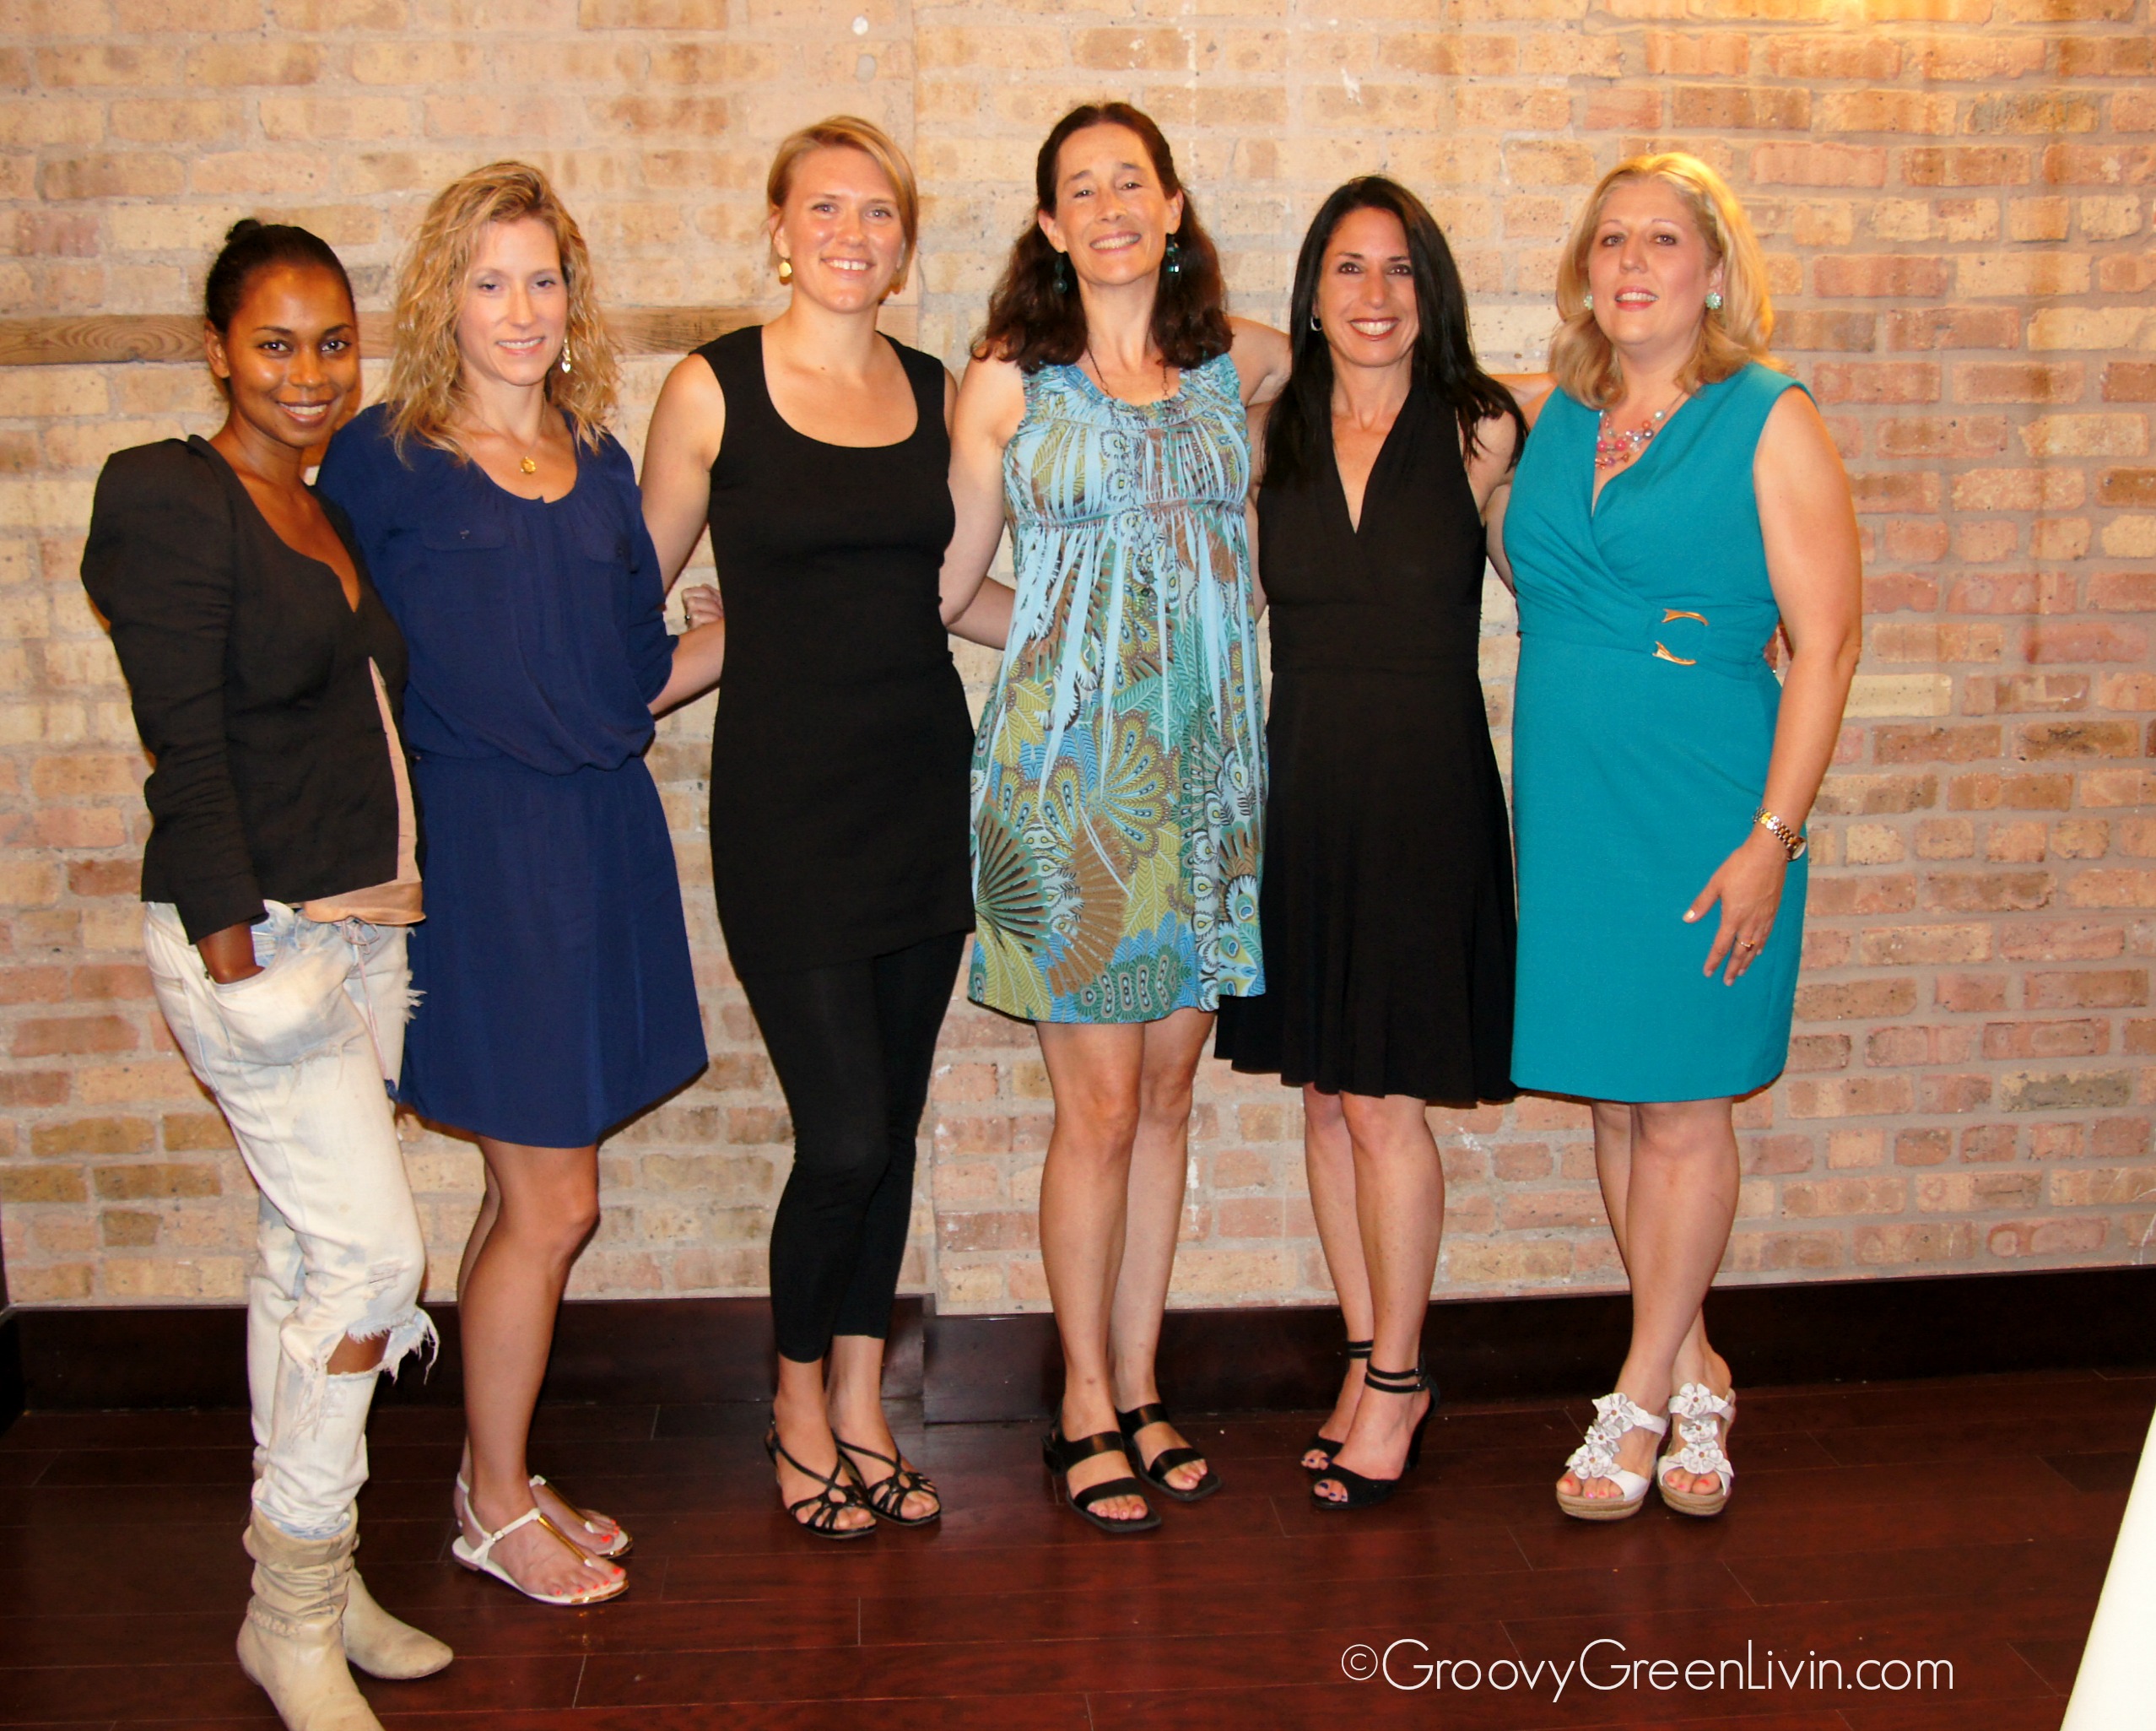 10 Things I Learned at BlogHer